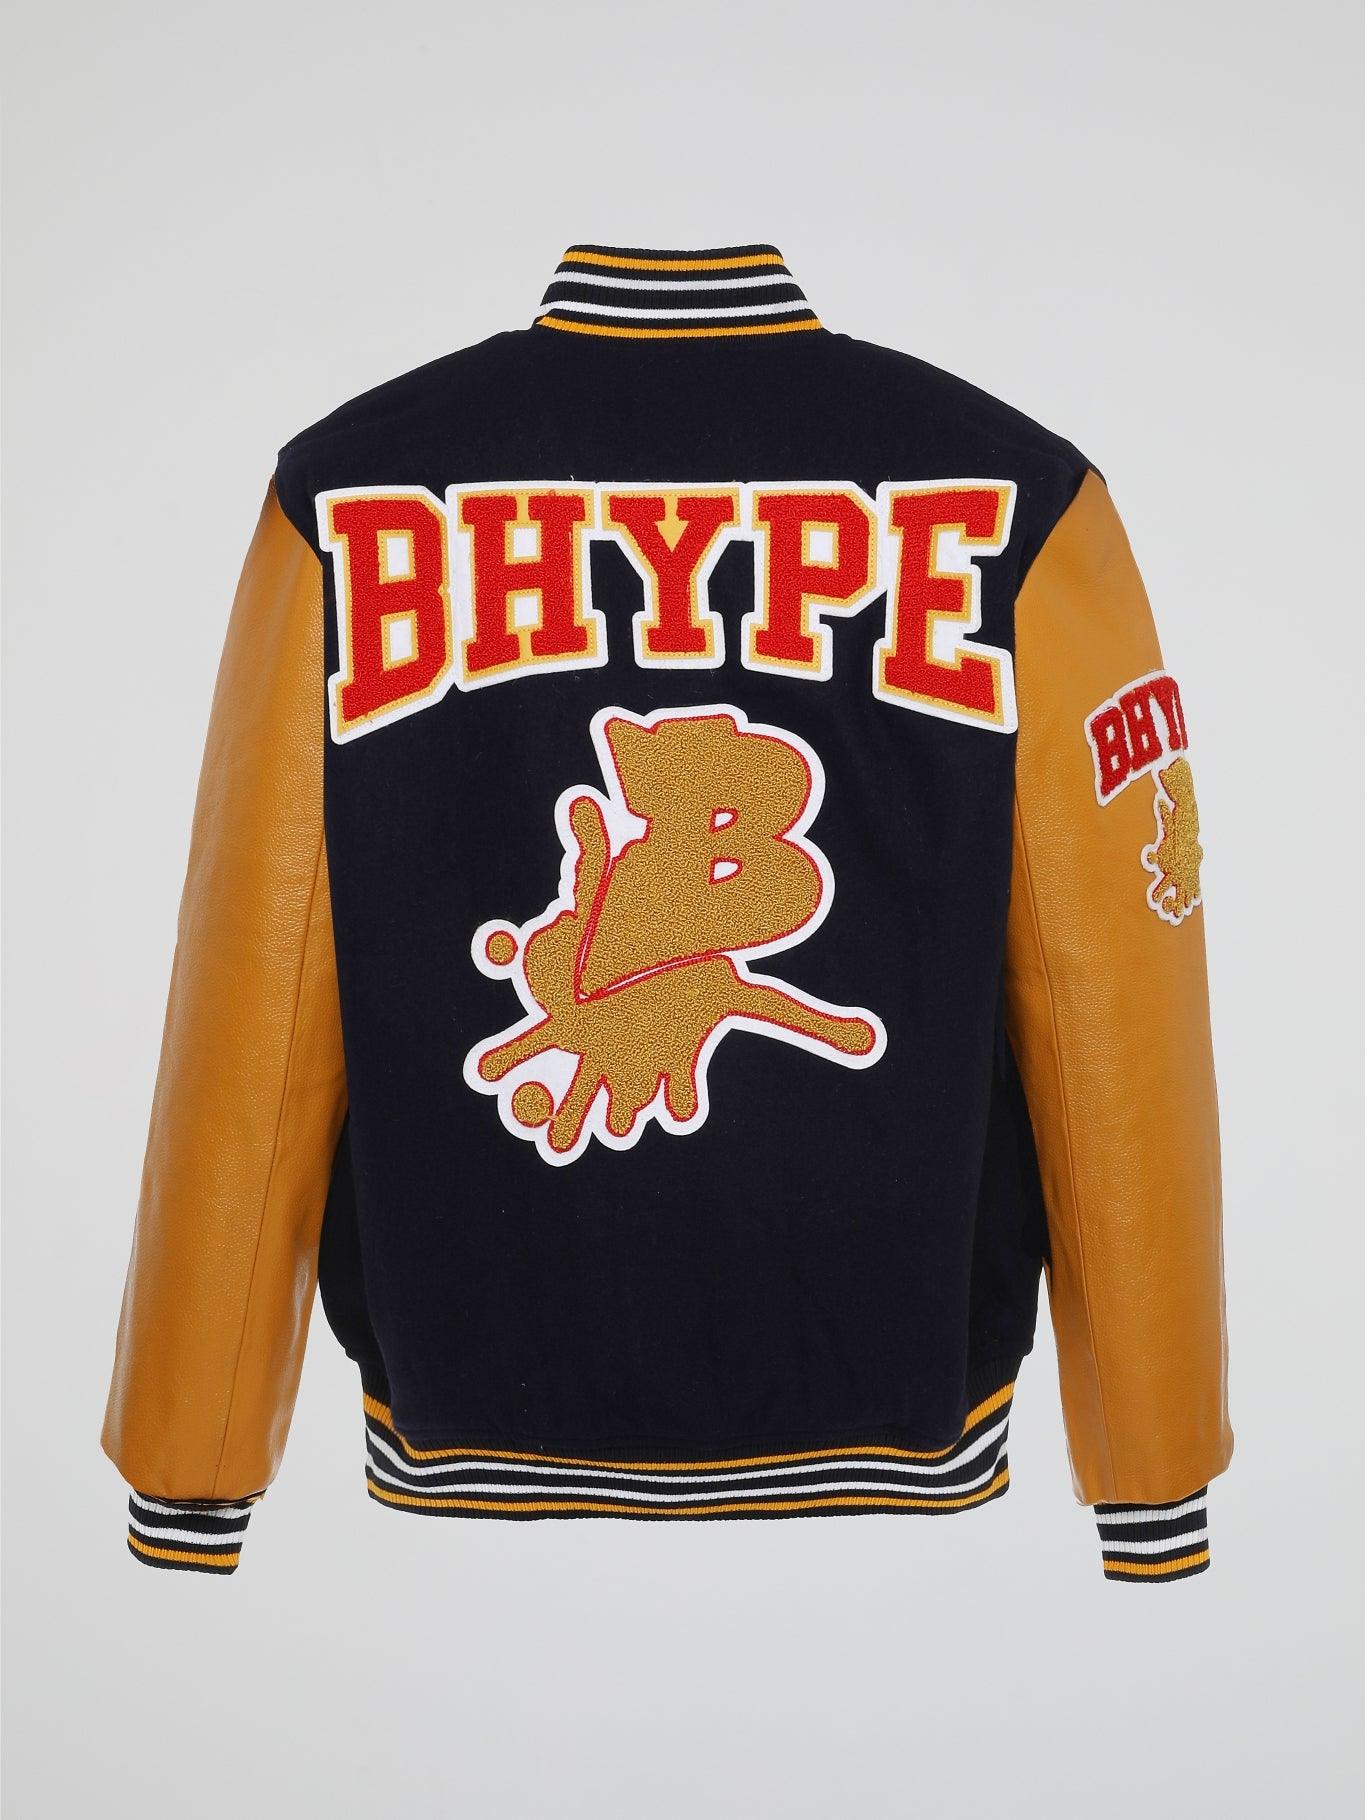 BHYPE VARSITY COLLECTION JACKET BLUE/YELLOW - B-Hype Society